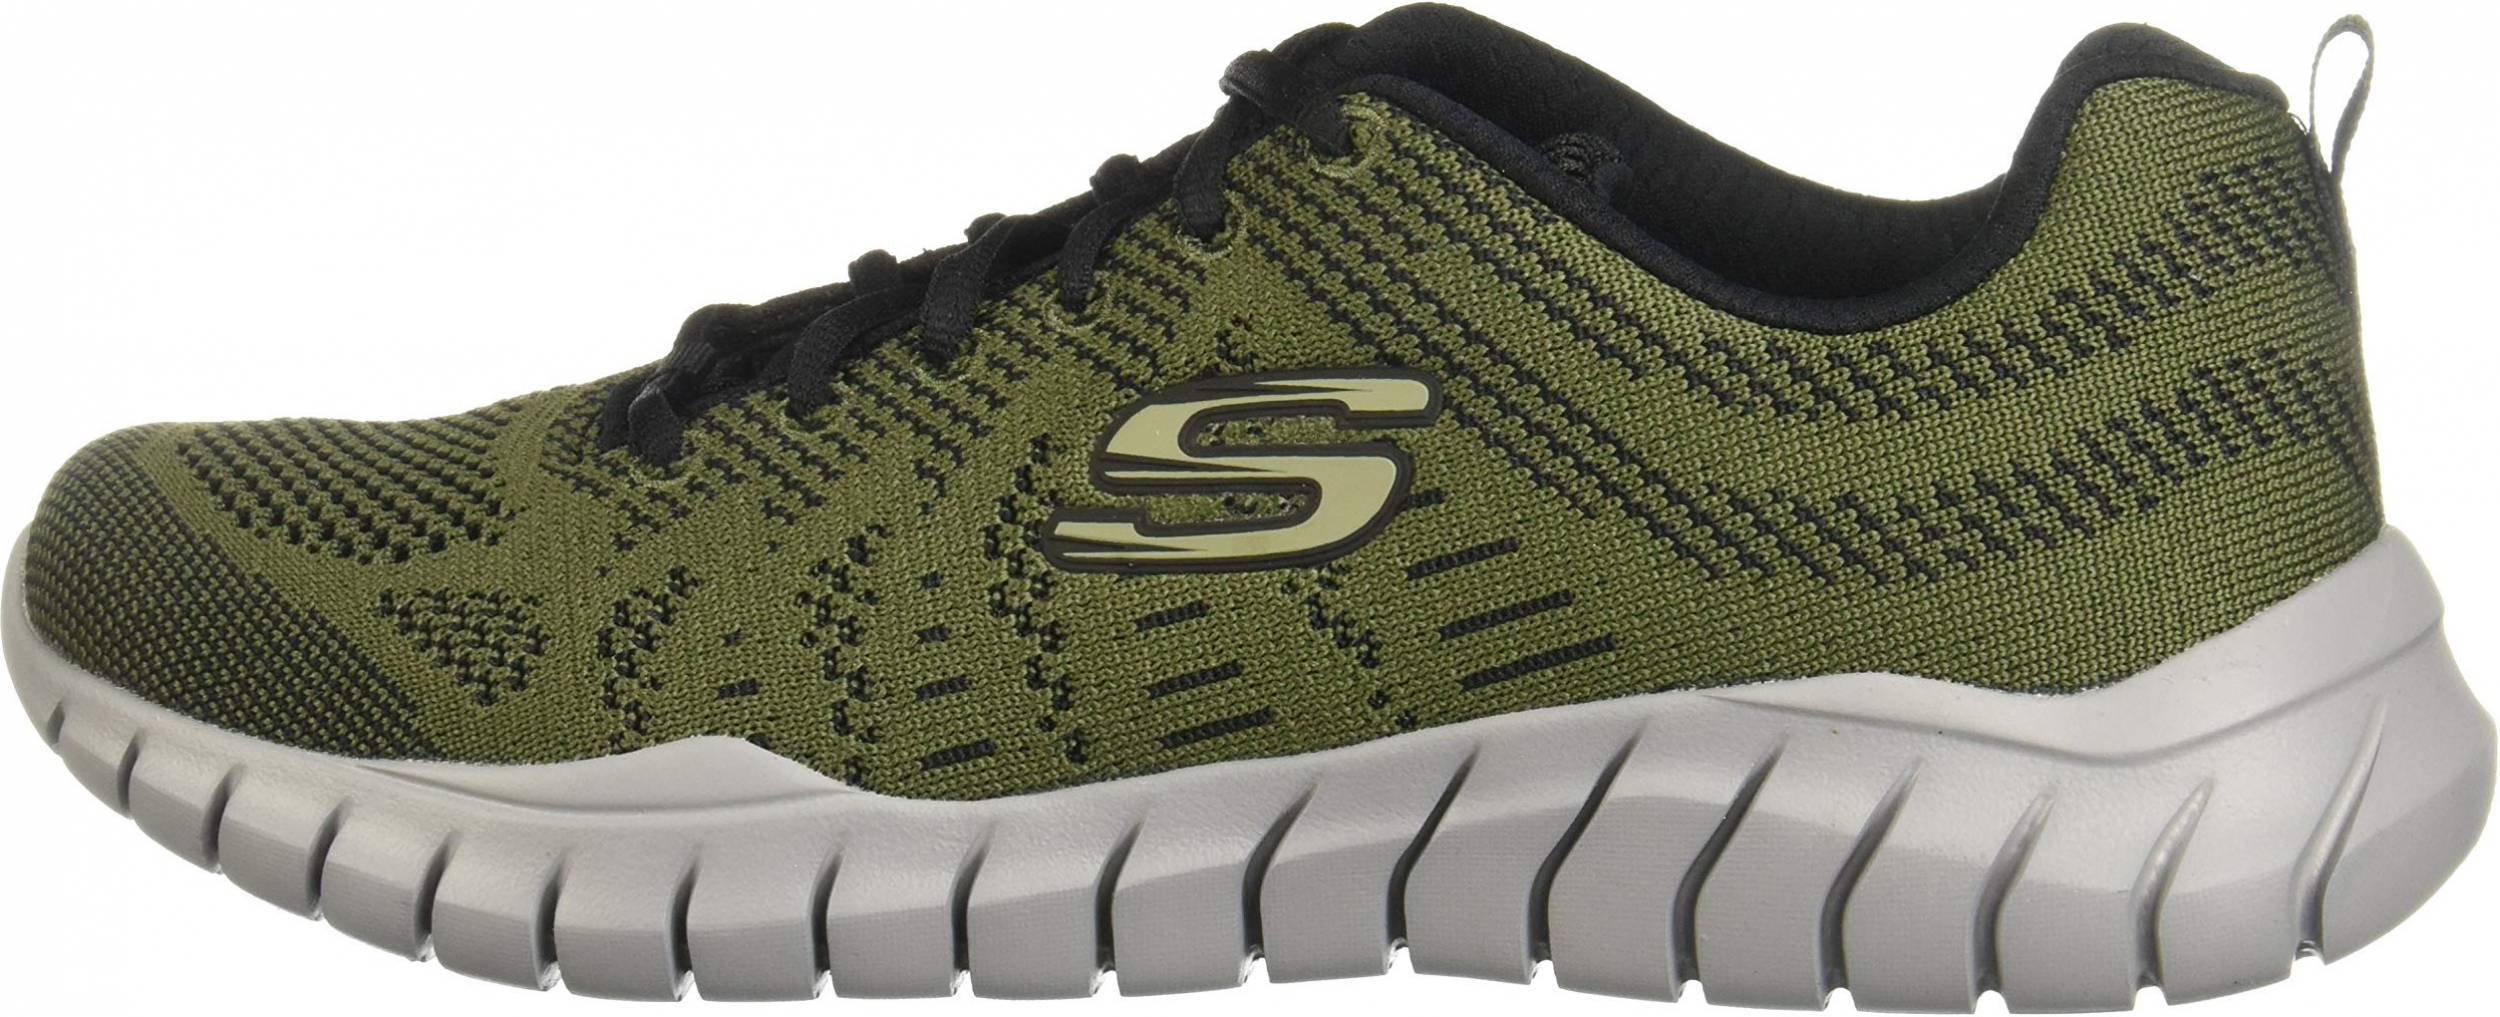 best skechers for working out